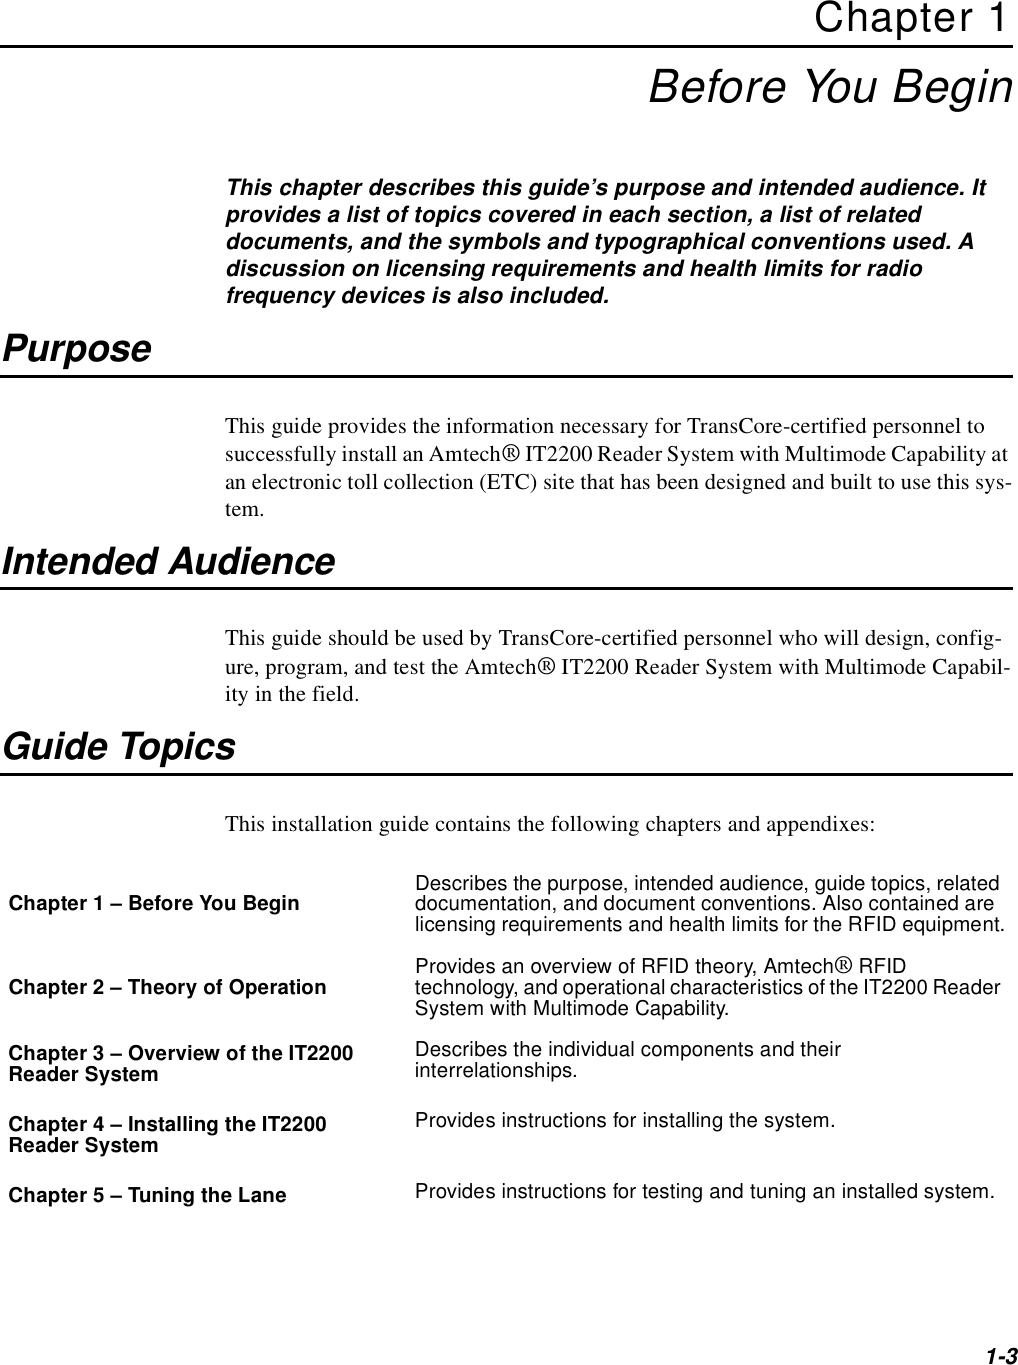 1-3Chapter 1Before You BeginThis chapter describes this guide’s purpose and intended audience. It provides a list of topics covered in each section, a list of related documents, and the symbols and typographical conventions used. A discussion on licensing requirements and health limits for radio frequency devices is also included.PurposeThis guide provides the information necessary for TransCore-certified personnel to successfully install an Amtech® IT2200 Reader System with Multimode Capability at an electronic toll collection (ETC) site that has been designed and built to use this sys-tem.Intended AudienceThis guide should be used by TransCore-certified personnel who will design, config-ure, program, and test the Amtech® IT2200 Reader System with Multimode Capabil-ity in the field.Guide TopicsThis installation guide contains the following chapters and appendixes:Chapter 1 – Before You Begin Describes the purpose, intended audience, guide topics, related documentation, and document conventions. Also contained are licensing requirements and health limits for the RFID equipment.Chapter 2 – Theory of Operation Provides an overview of RFID theory, Amtech® RFID technology, and operational characteristics of the IT2200 Reader System with Multimode Capability.Chapter 3 – Overview of the IT2200 Reader System Describes the individual components and their interrelationships.Chapter 4 – Installing the IT2200 Reader System Provides instructions for installing the system.Chapter 5 – Tuning the Lane Provides instructions for testing and tuning an installed system.